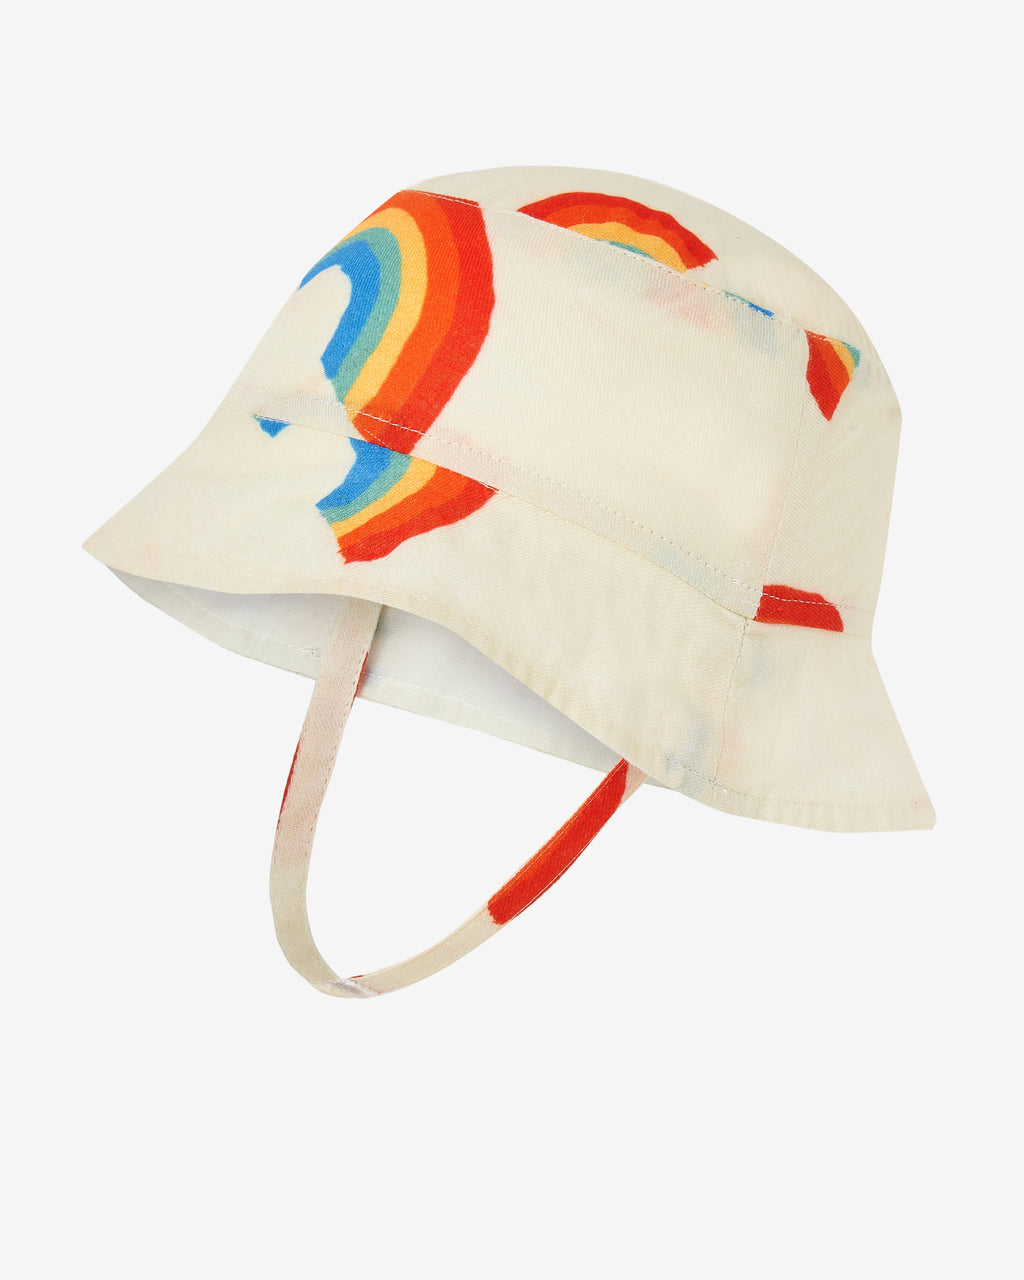 Off-white sun hat with rainbow all-over print. This hat comes with 2 straps to make it easier to fit on the child's head. Made by Nadadelazos.